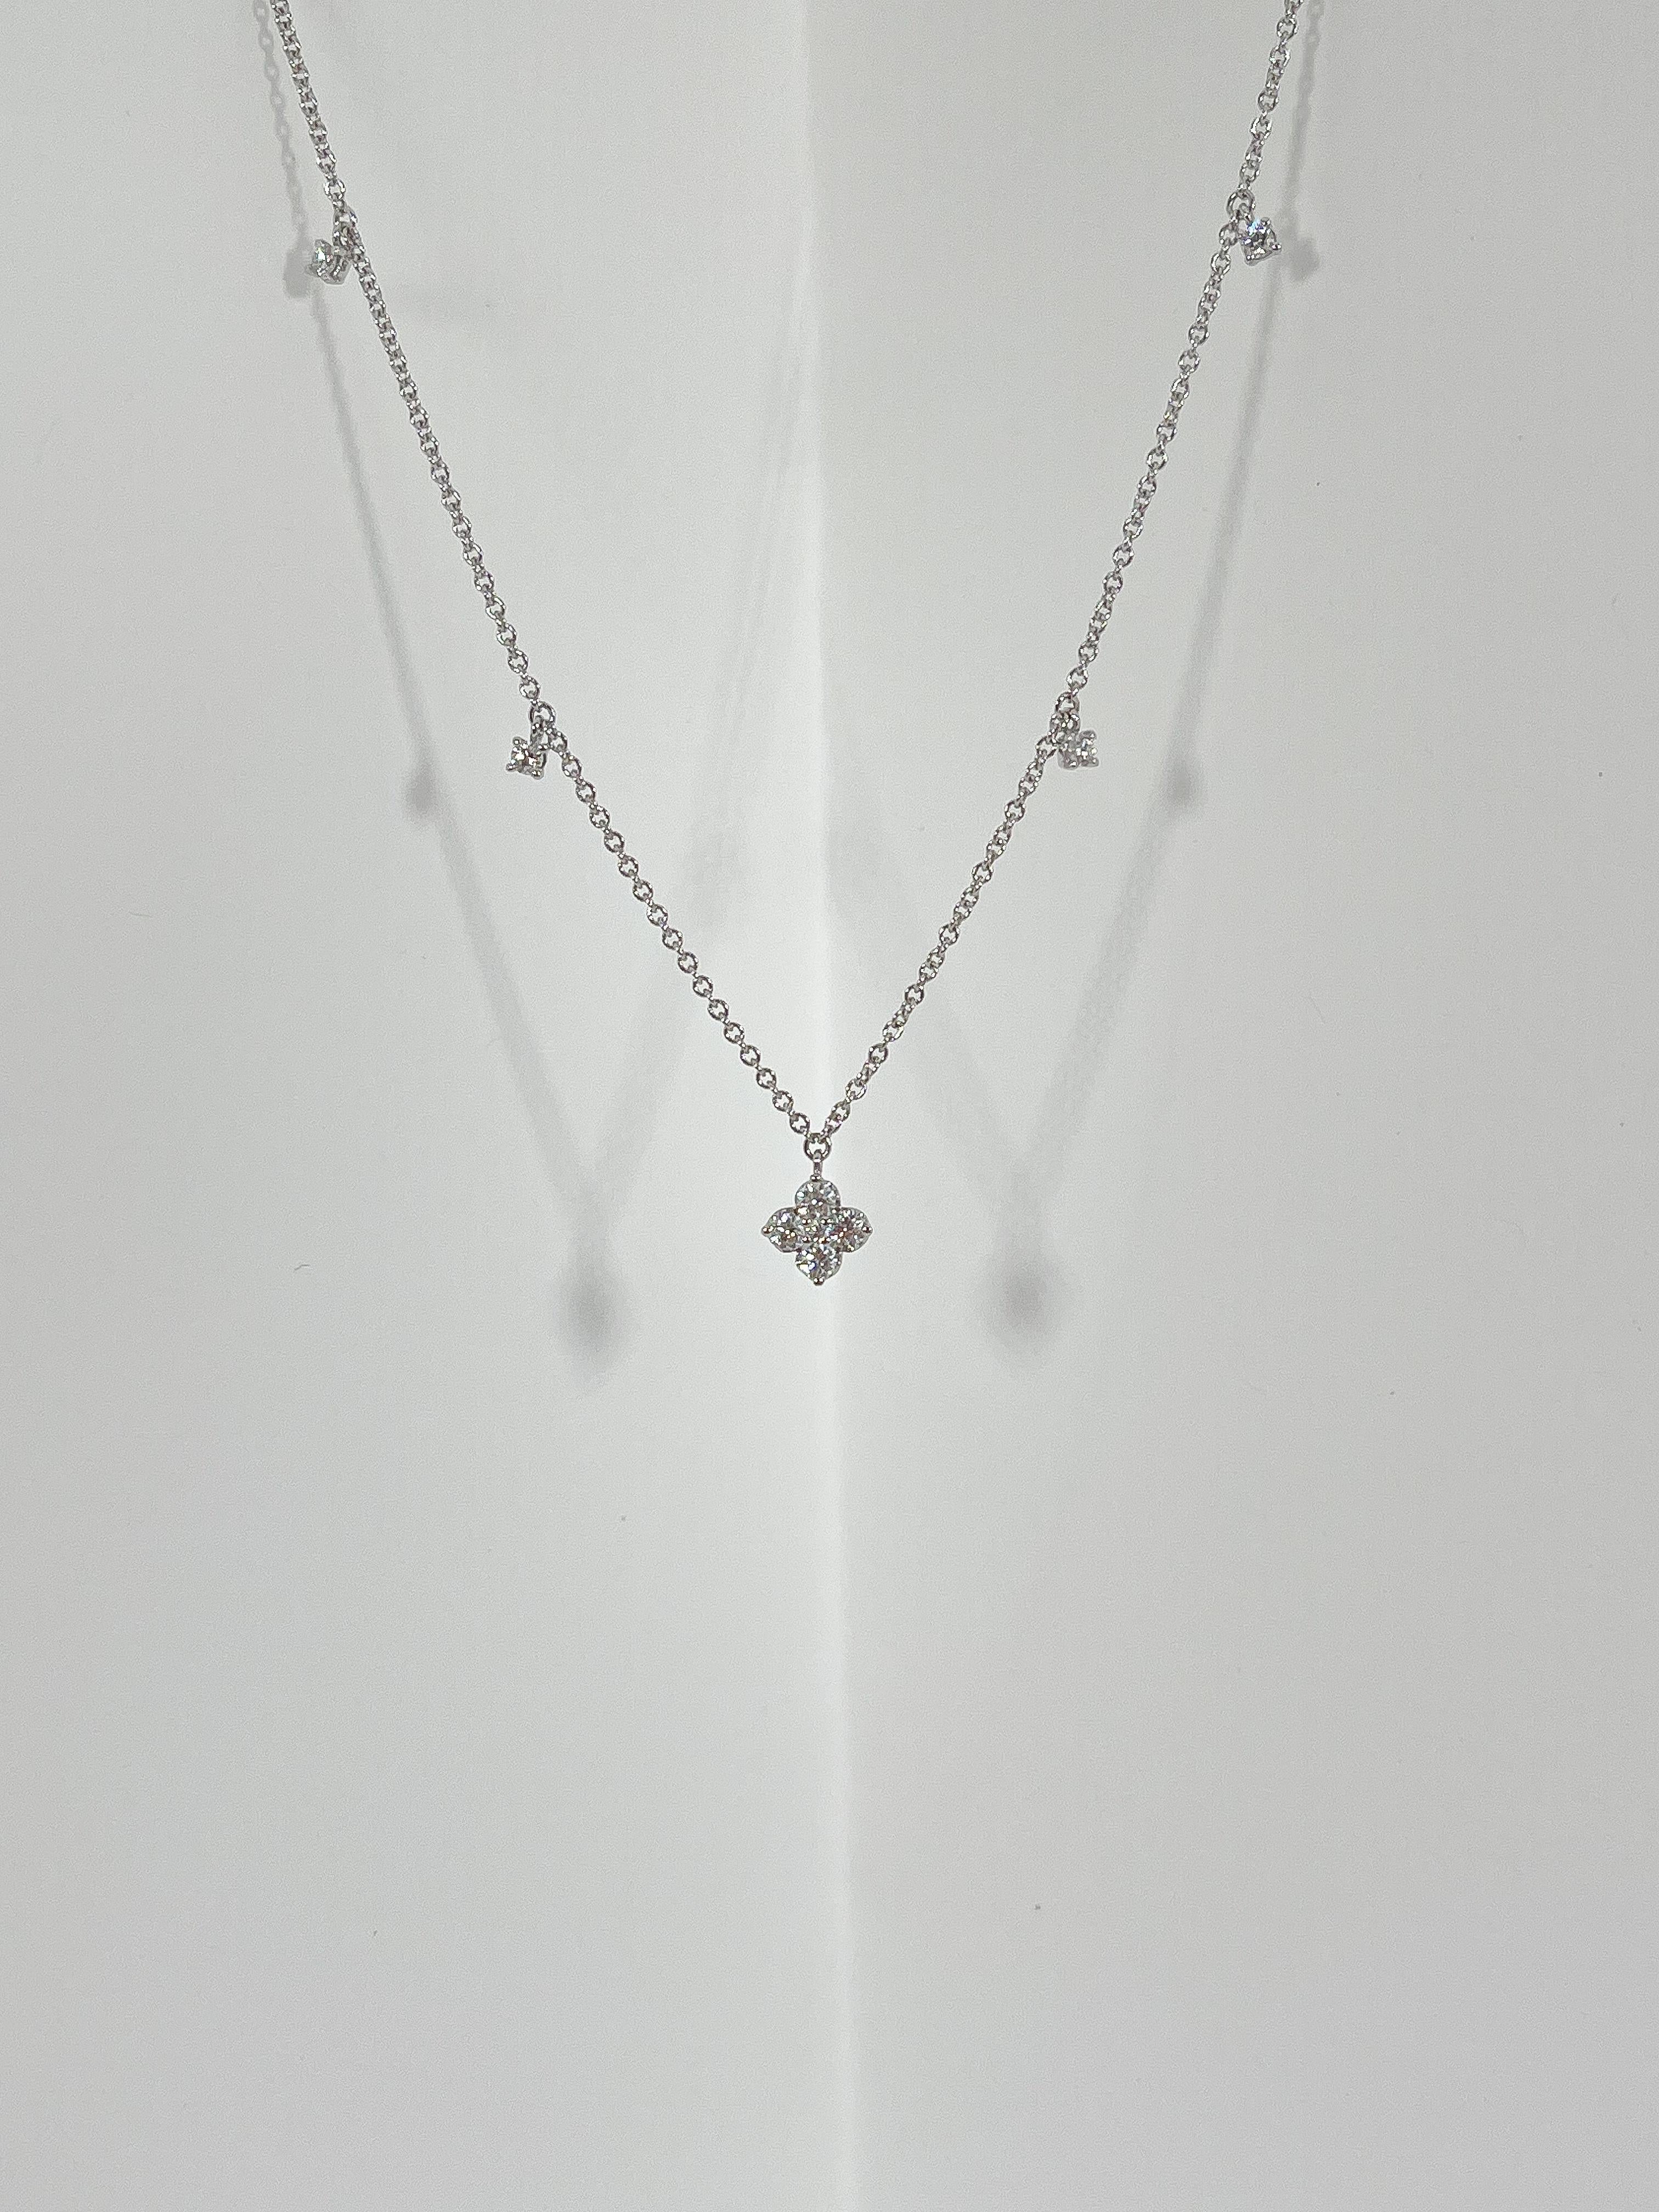 Zeghani 14k white gold .32 CTW diamond pendant and diamond drop necklace. The diamonds in this necklace are all round, has a lobster clasp to open and close, the length is 18 inches, the width of the pendant is 6.7 mm, and it has a total weight of